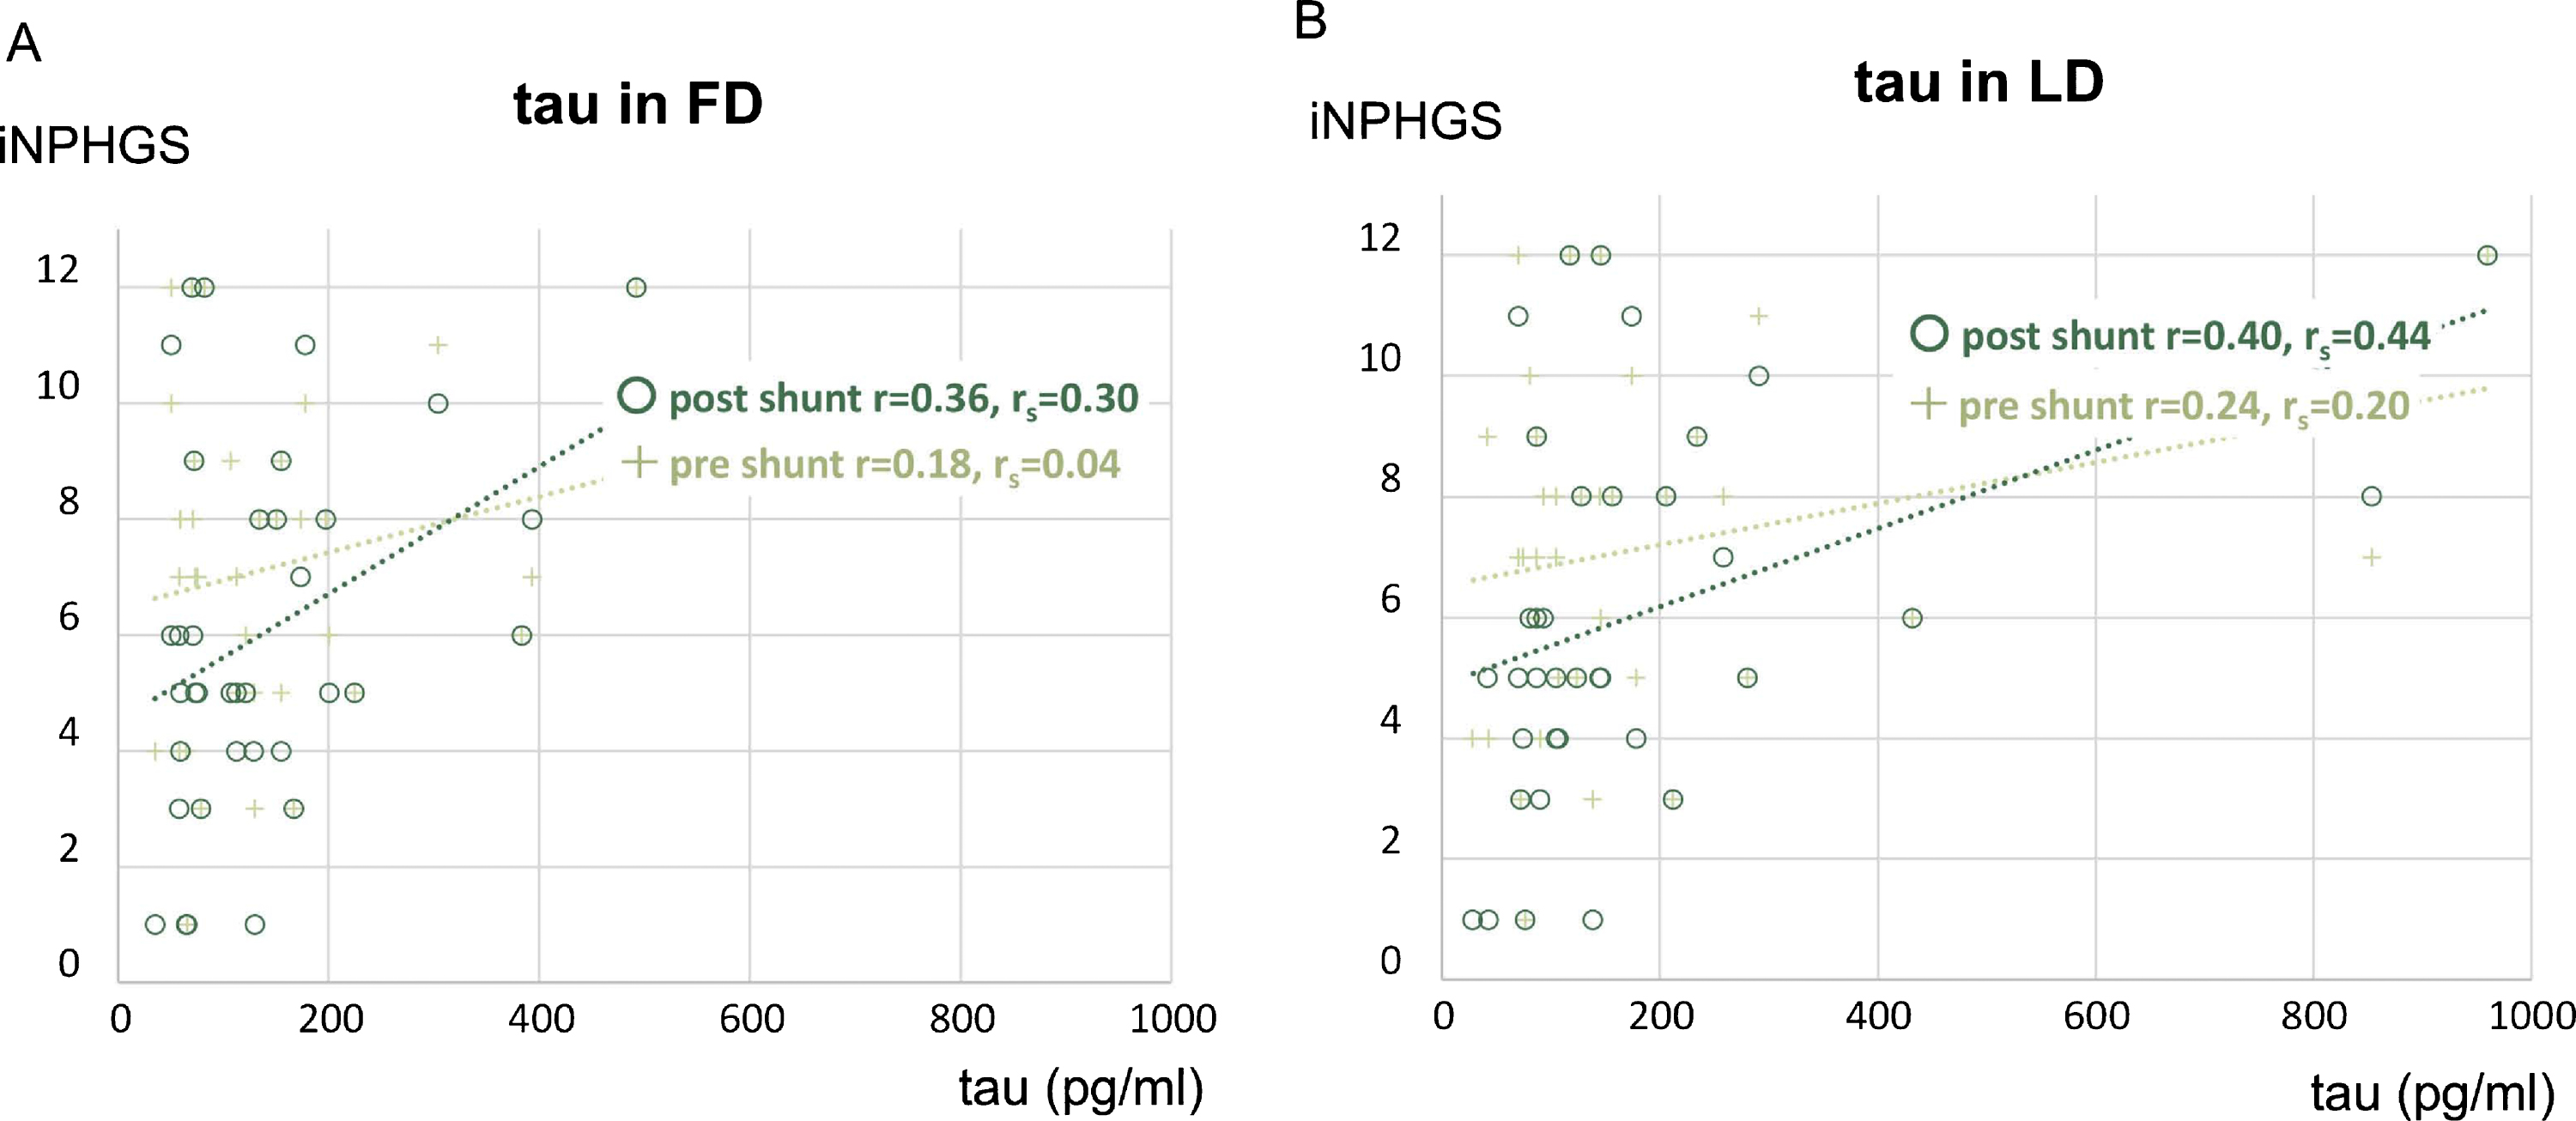 Relationship of CSF tau concentrations (FD and LD) to iNPHGS (pre- and post-shunt surgery). Association between CSF tau concentrations in FD and iNPHGS (A) and association between CSF tau concentrations in LD and iNPHGS (B). tau, total tau; iNPHGS, iNPH Grading Scale; FD, First Drip; LD, Last Drip; r, Pearson correlation; rs, Spearman correlation